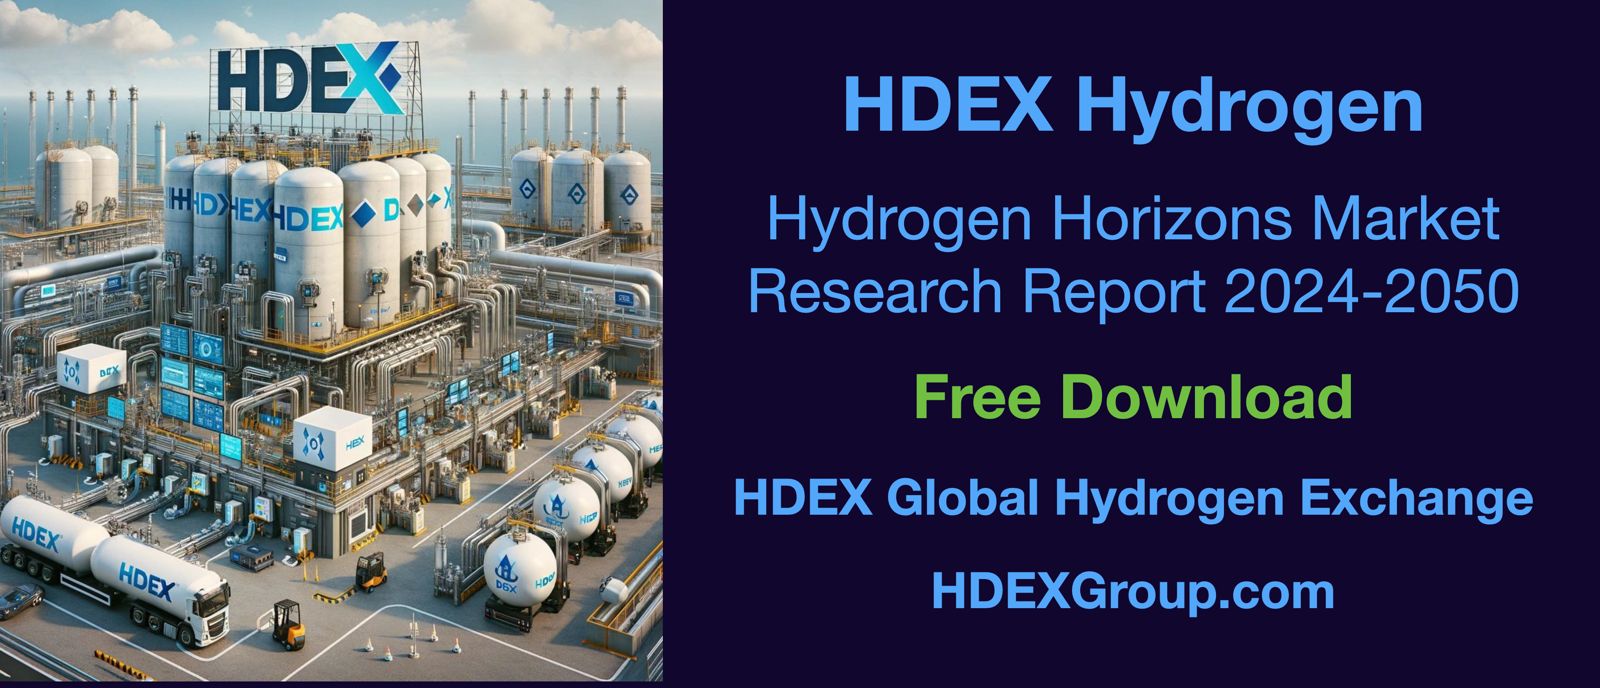 New Market Report "Hydrogen Horizons 2024-2050" Released by HDEX